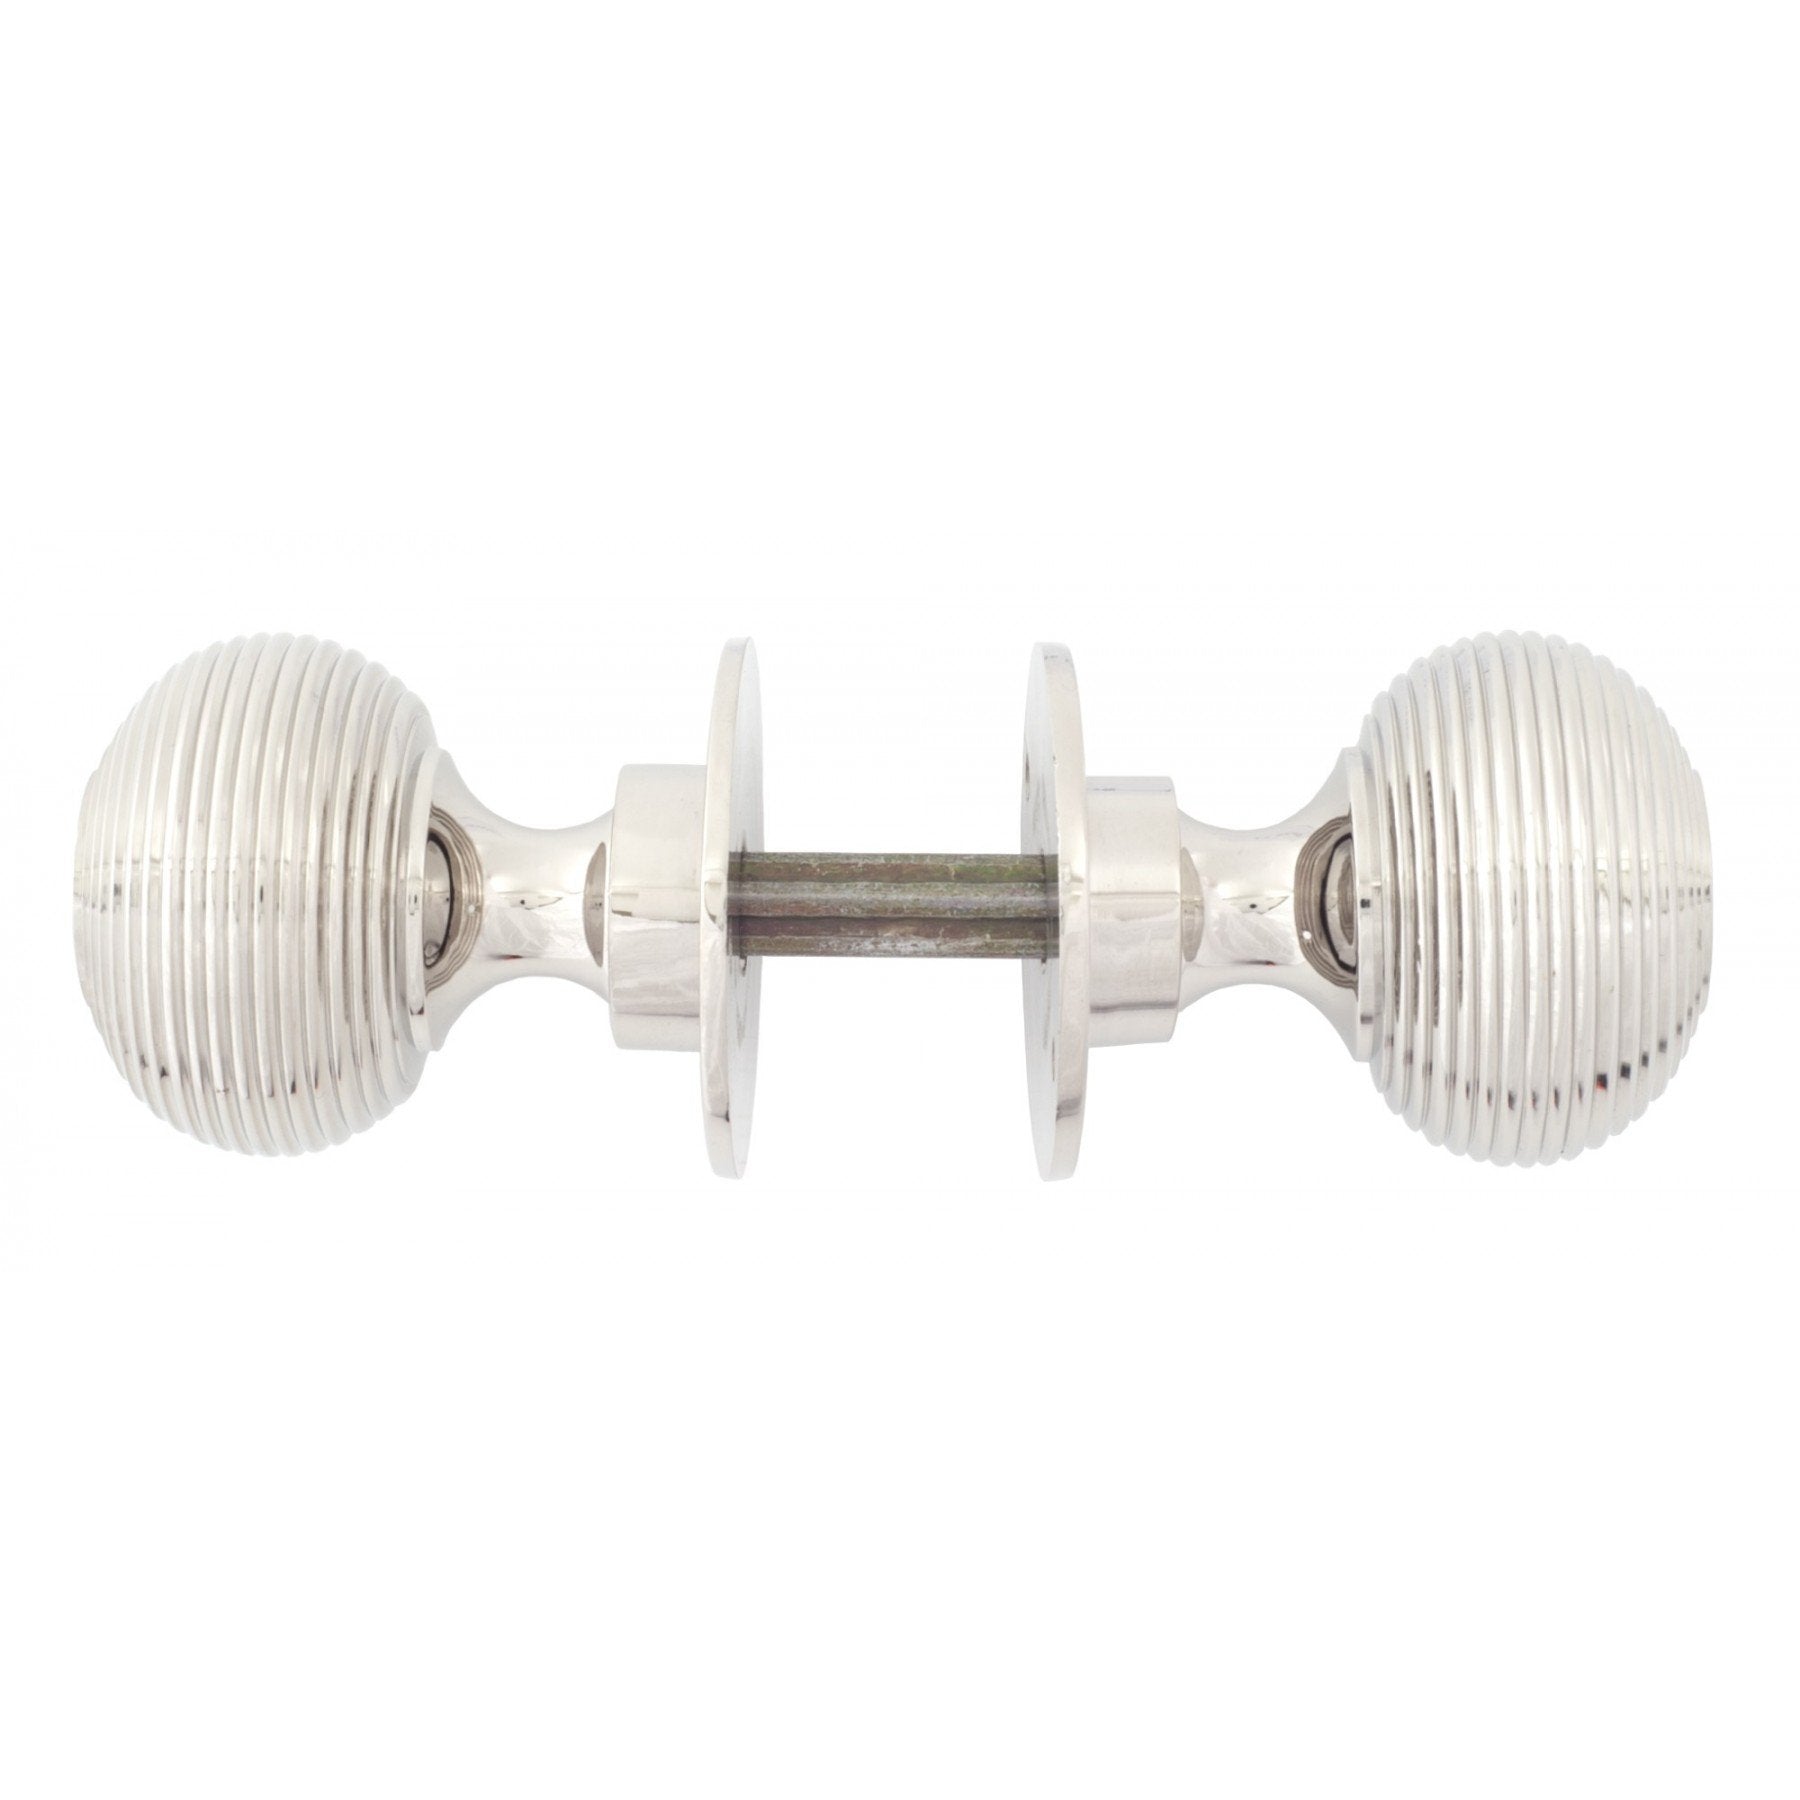 From the Anvil Polished Nickel Beehive Mortice/Rim Knobs